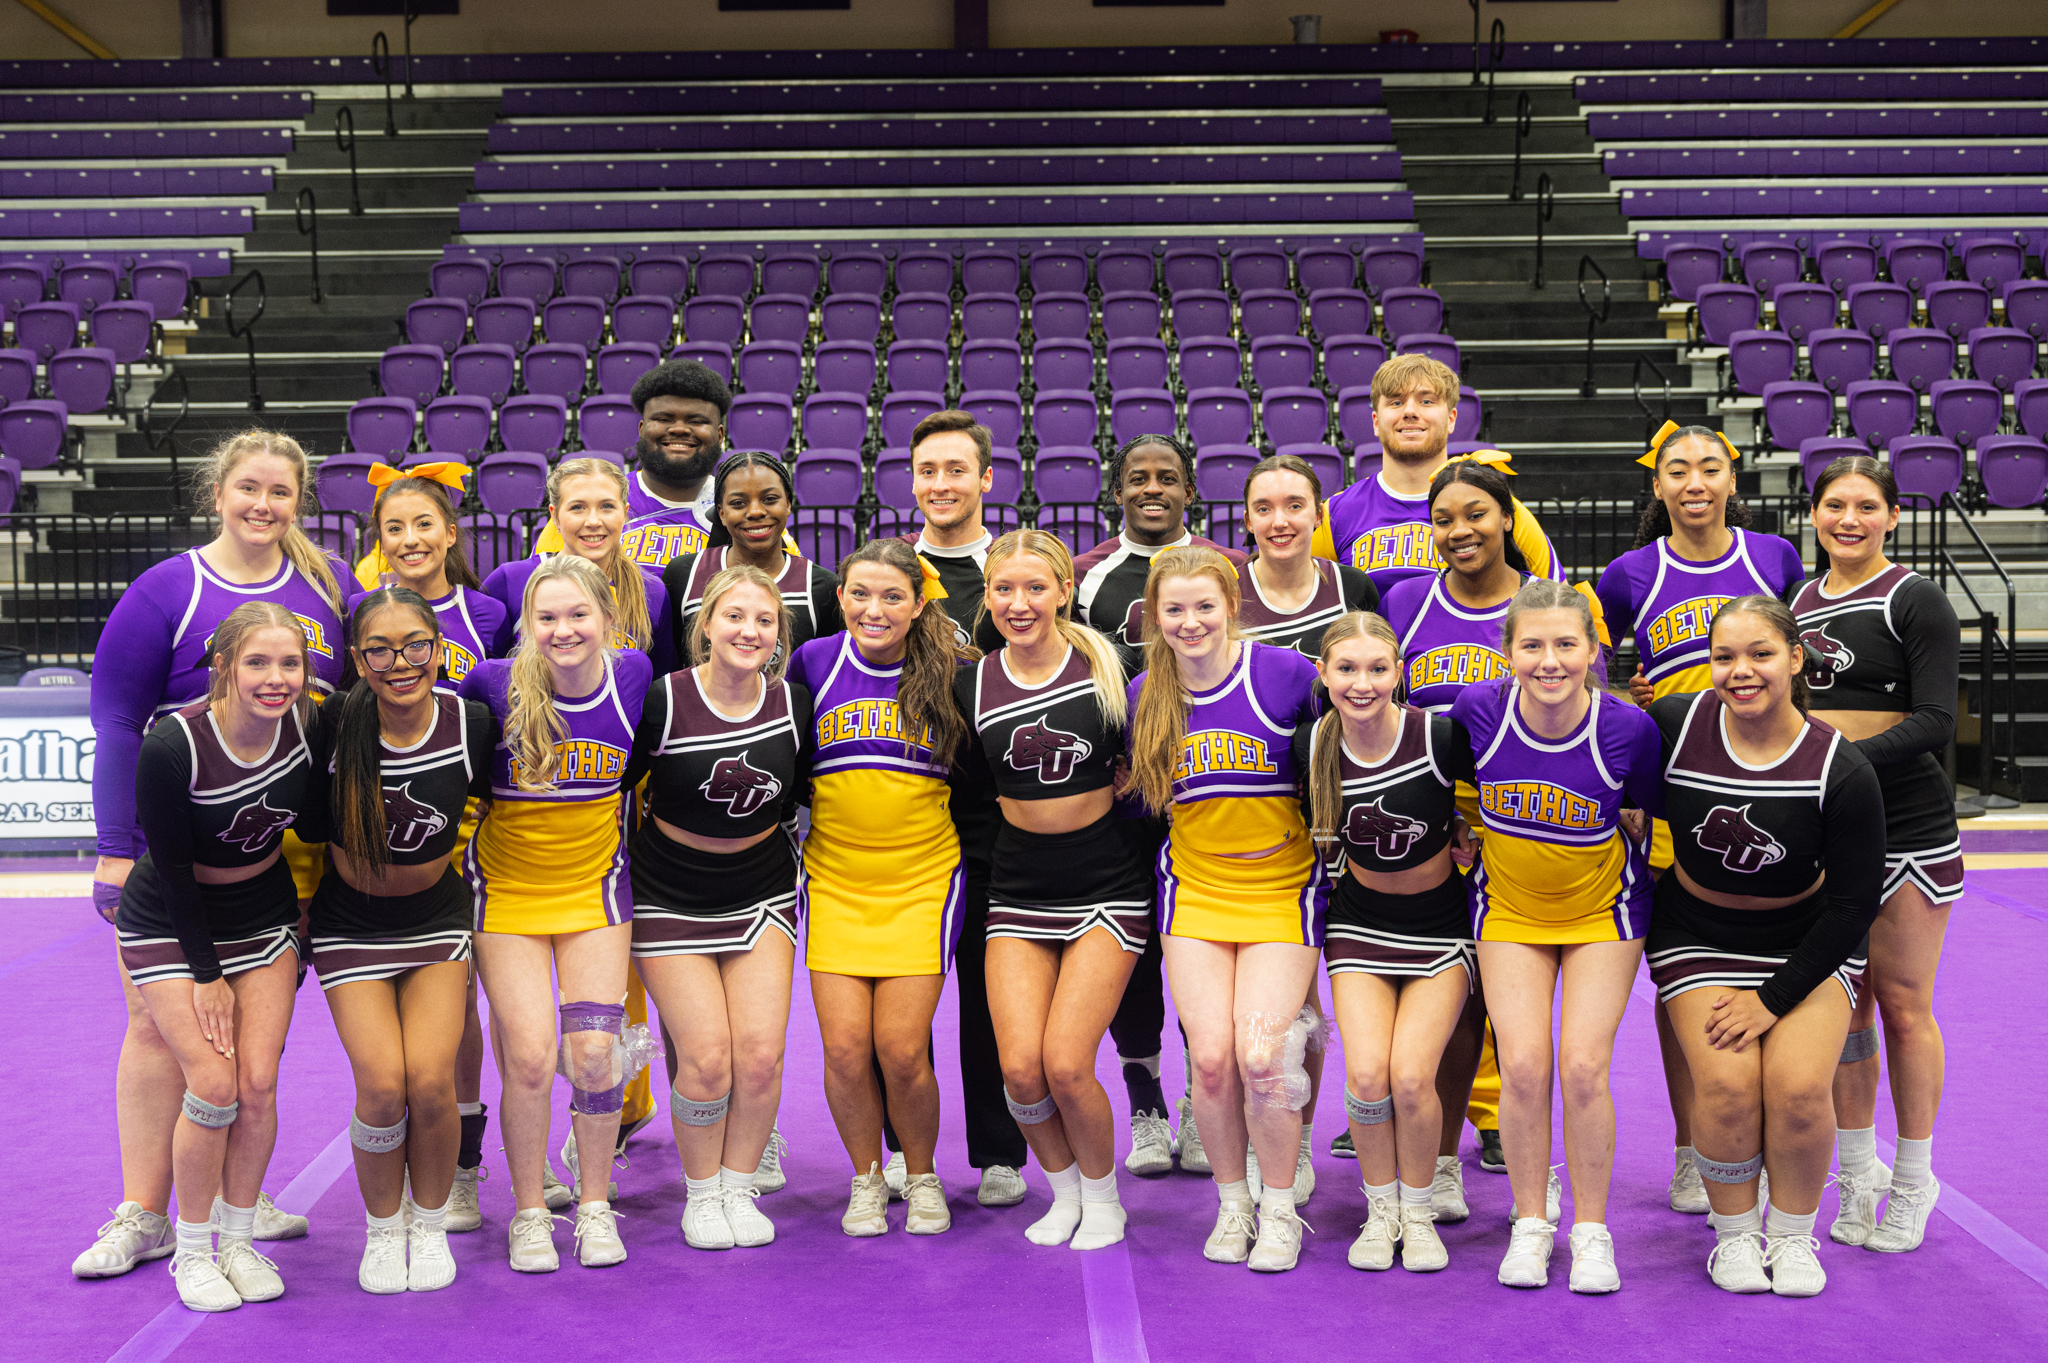 Bethel Cheer Hosts First Wildcat Invitational Cheer Competition